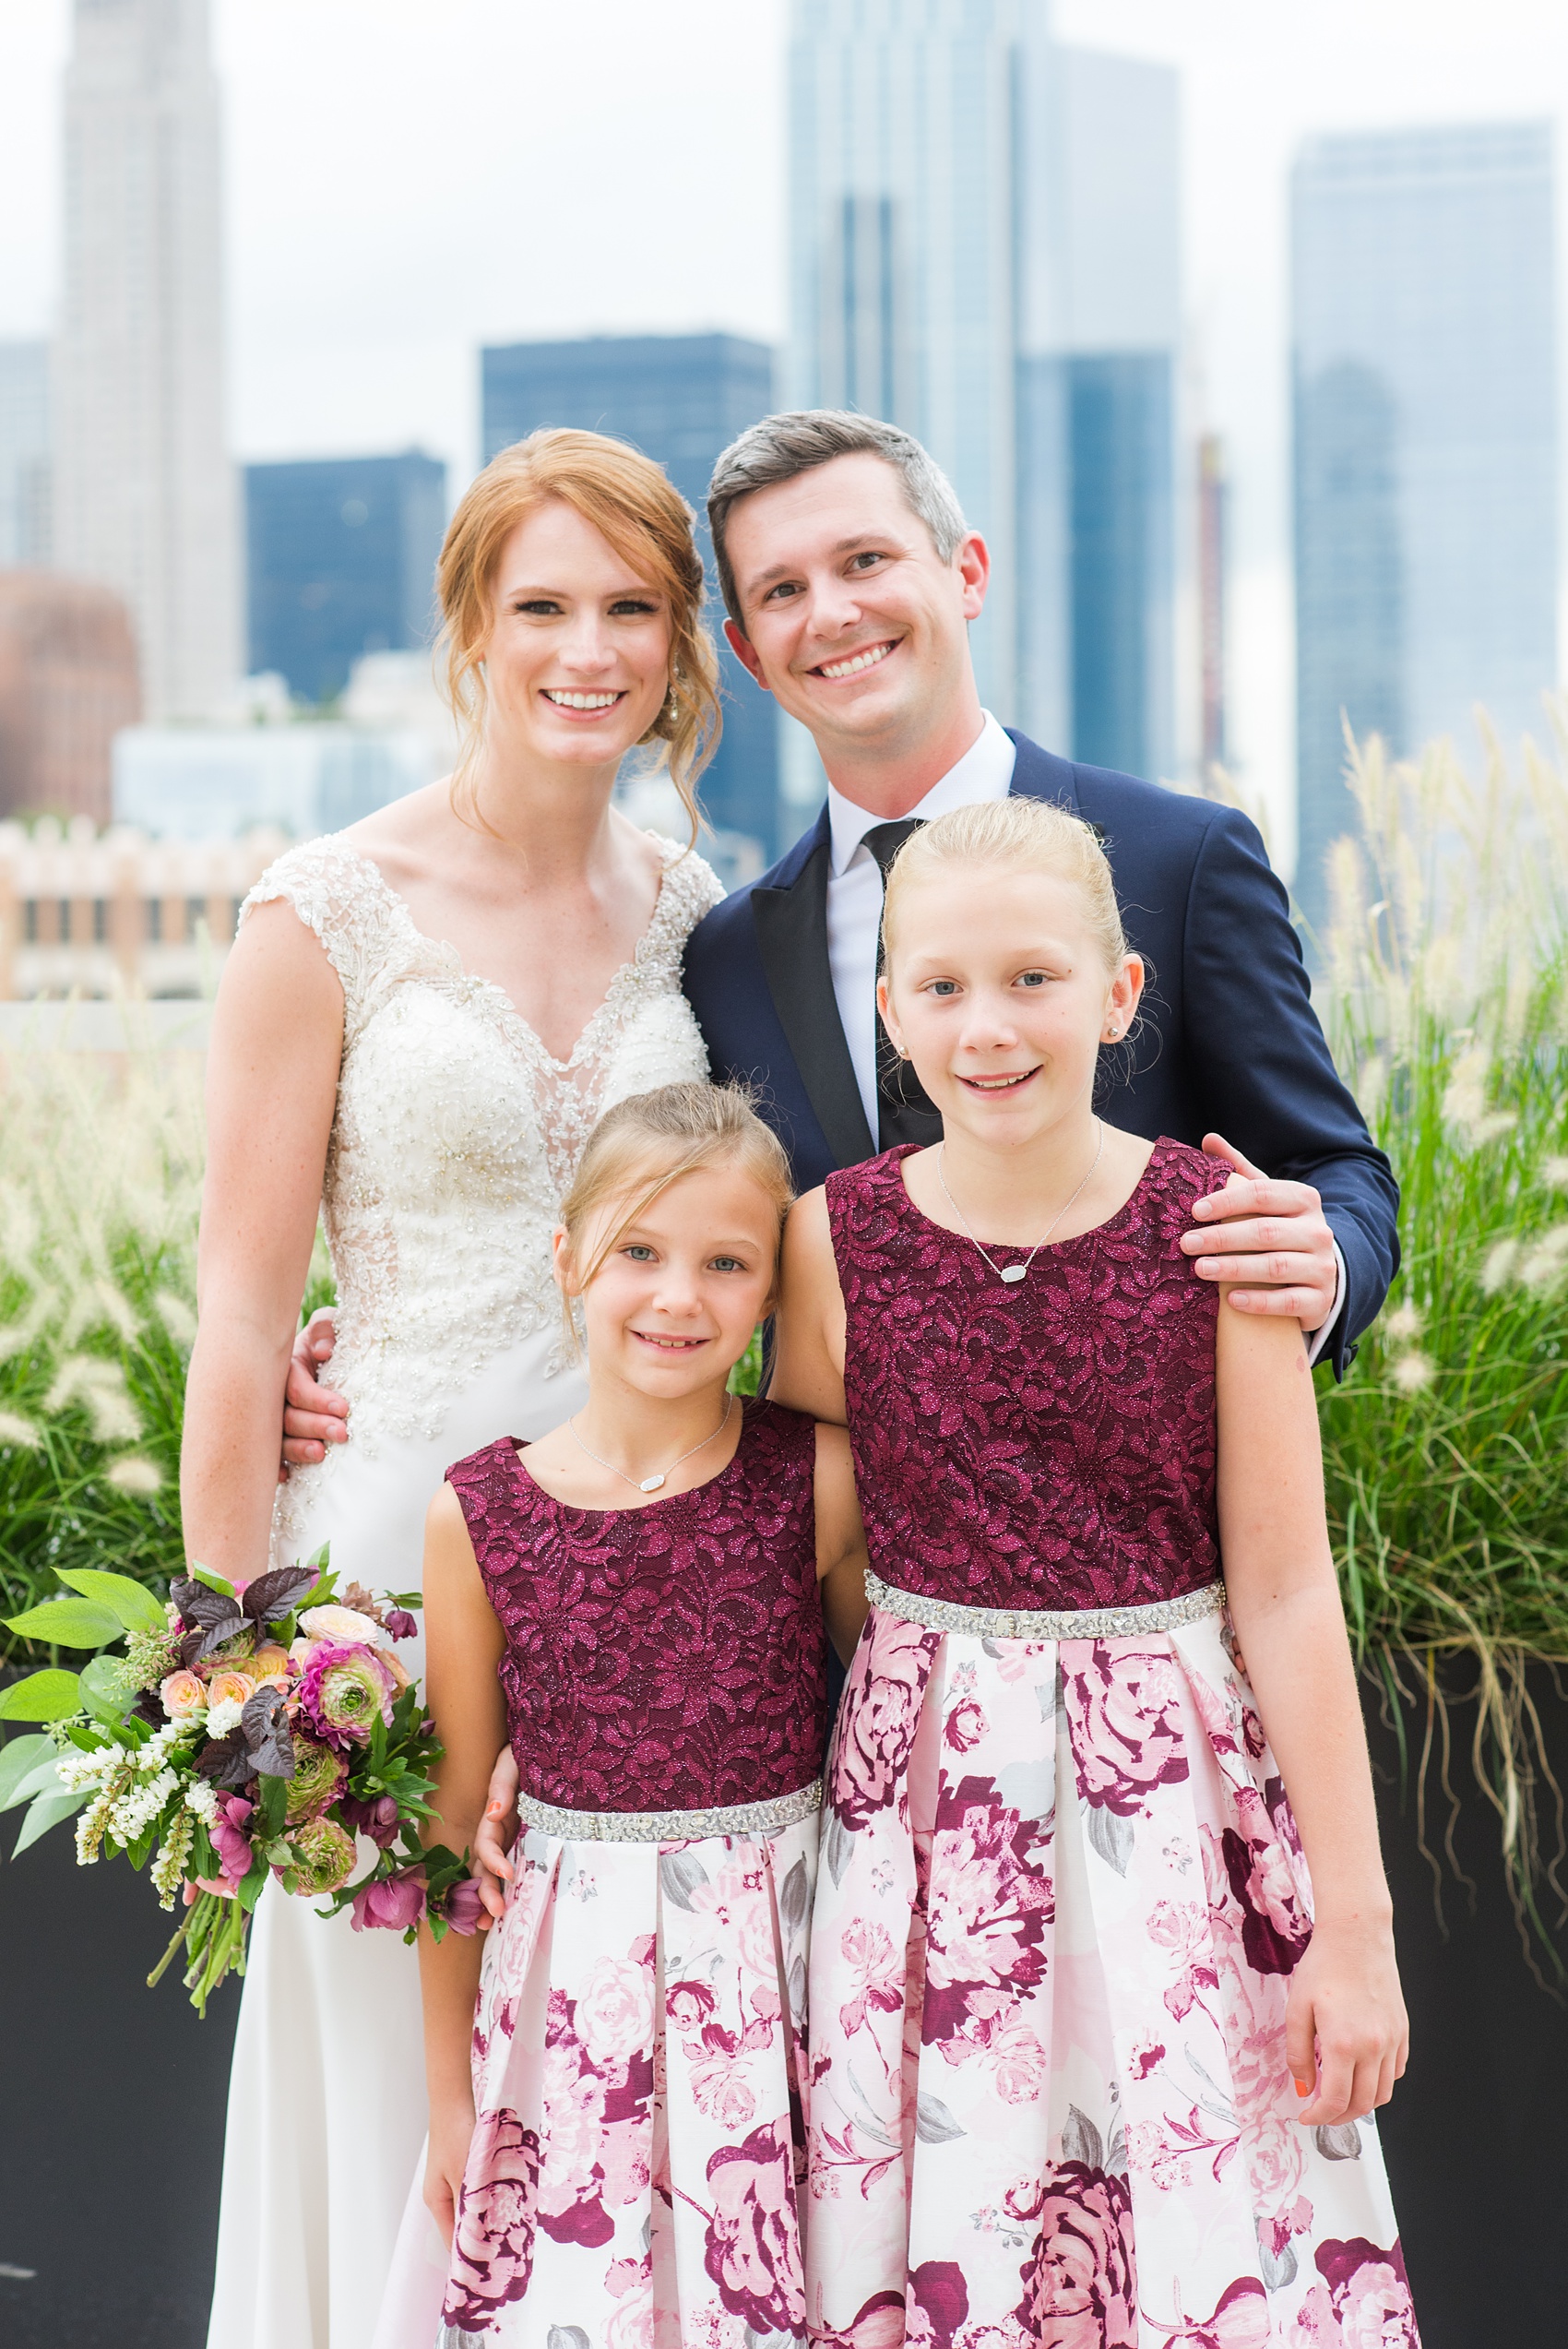 Photos of a NYC wedding venue, Tribeca Rooftop, by Mikkel Paige Photography. This ceremony and reception location has an outdoor space overlooking the Manhattan skyline. These pictures will provide inspiration in New York! The bride and groom posed for a photo with their flower girls, in complimentary cranberry patterned floral dresses. Click through for more details from this celebration! #TribecaRooftop #MikkelPaige #NYCwedding #NYCWeddingVenues #NYCWeddingPhotography #FlowerGirls